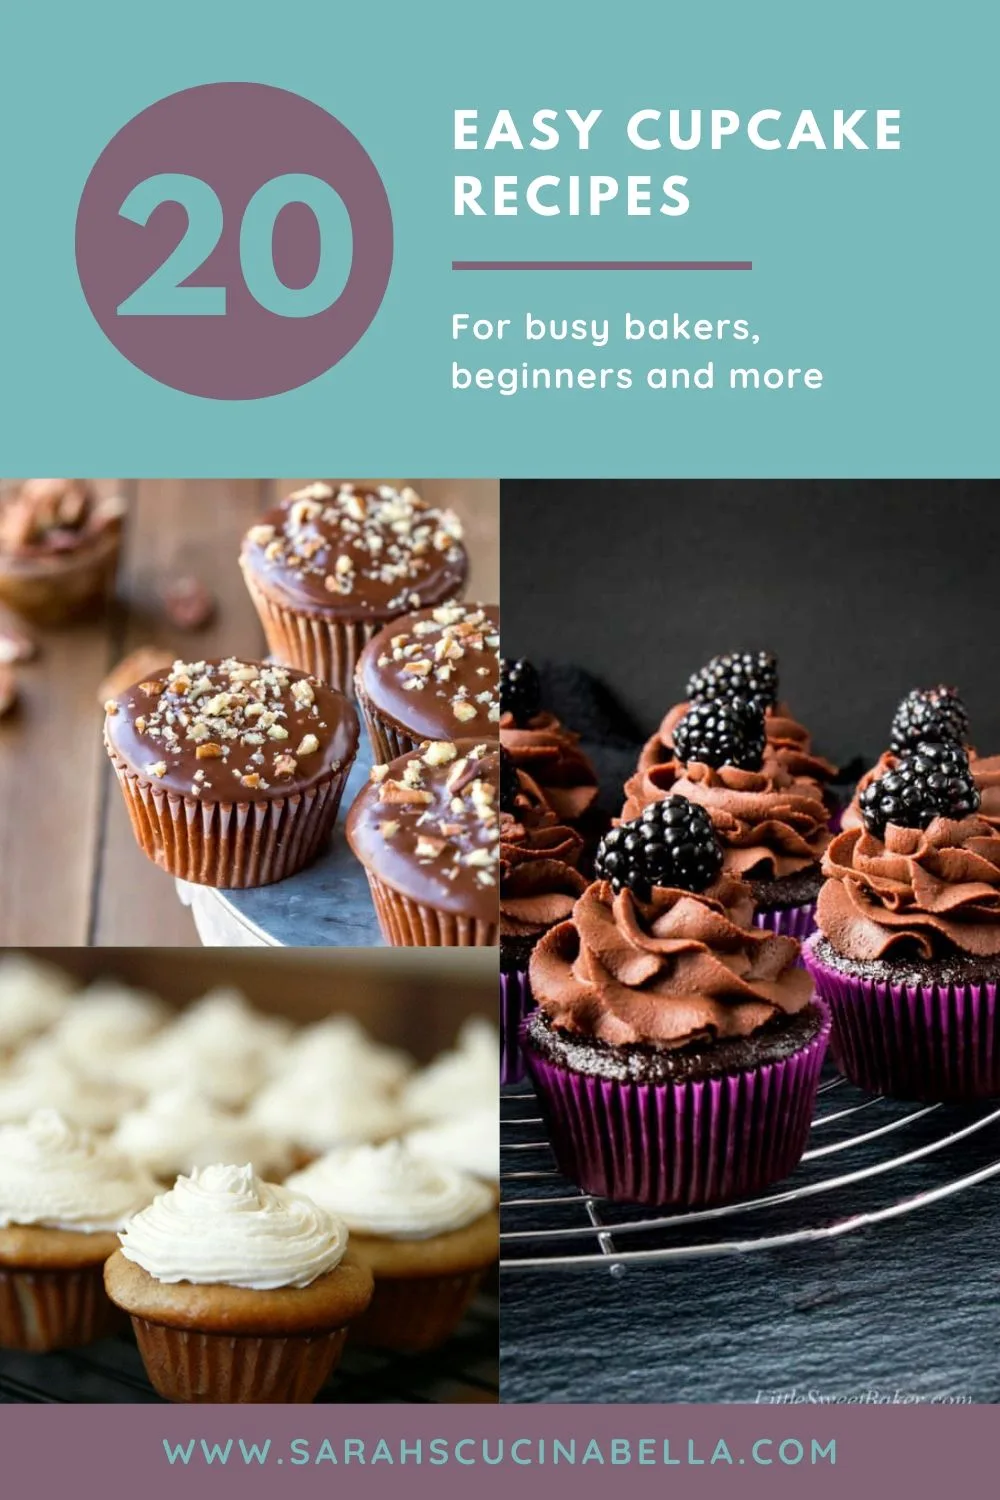 20 Easy Cupcake Recipes graphic. This shows three cupcake photos — a brown cupcake with brown frosting and a blackberry on top; a caramel colored cupcake with white frosting and a brown cupcake with brown glaze and chopped nuts.